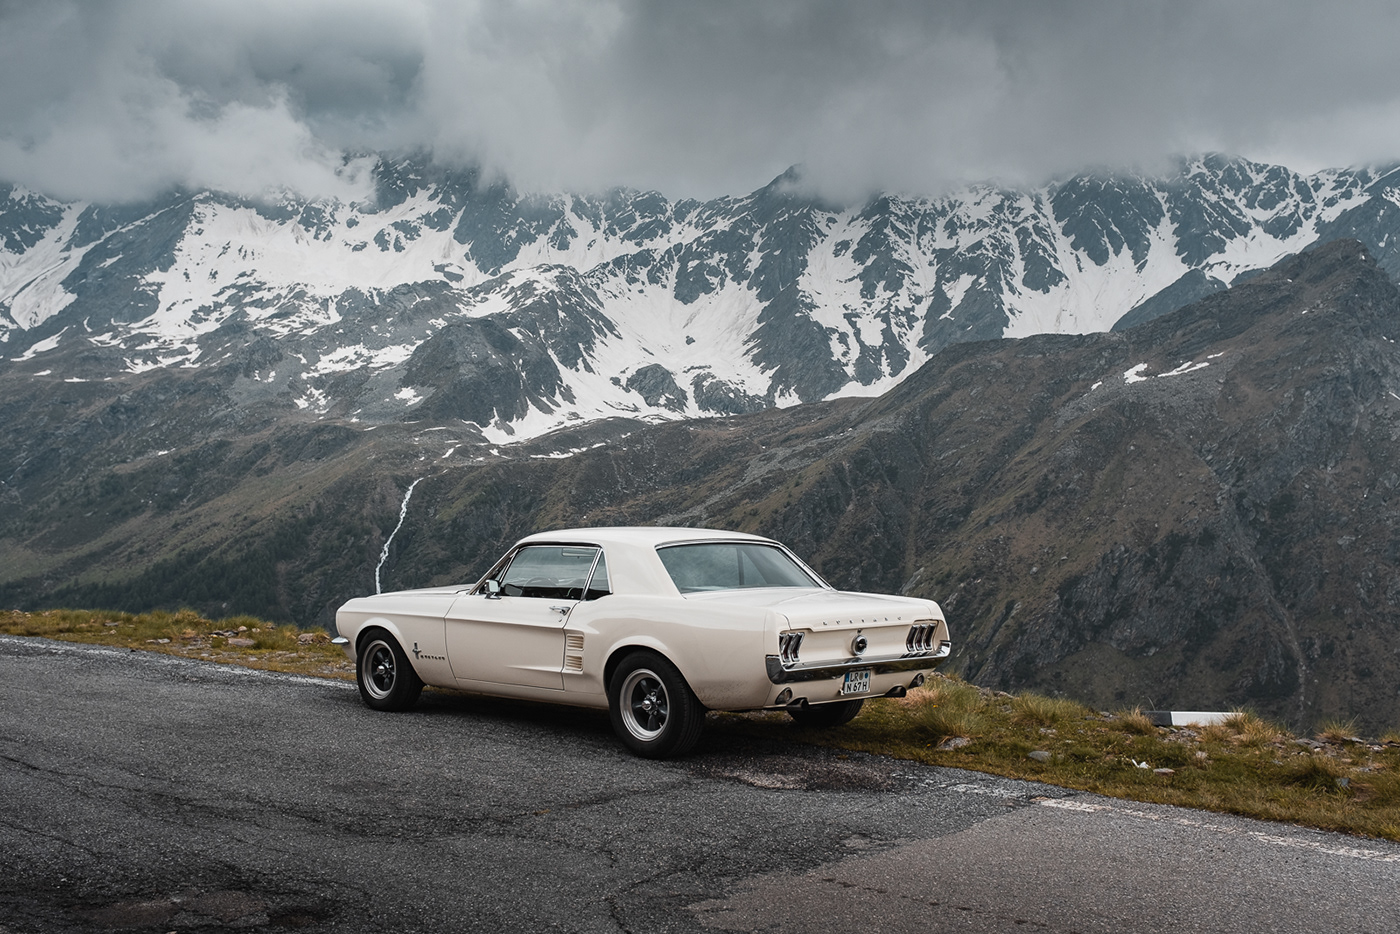 Ford Mustang Mustang Ford RoadTrip alps automotive   car muscle car mountain